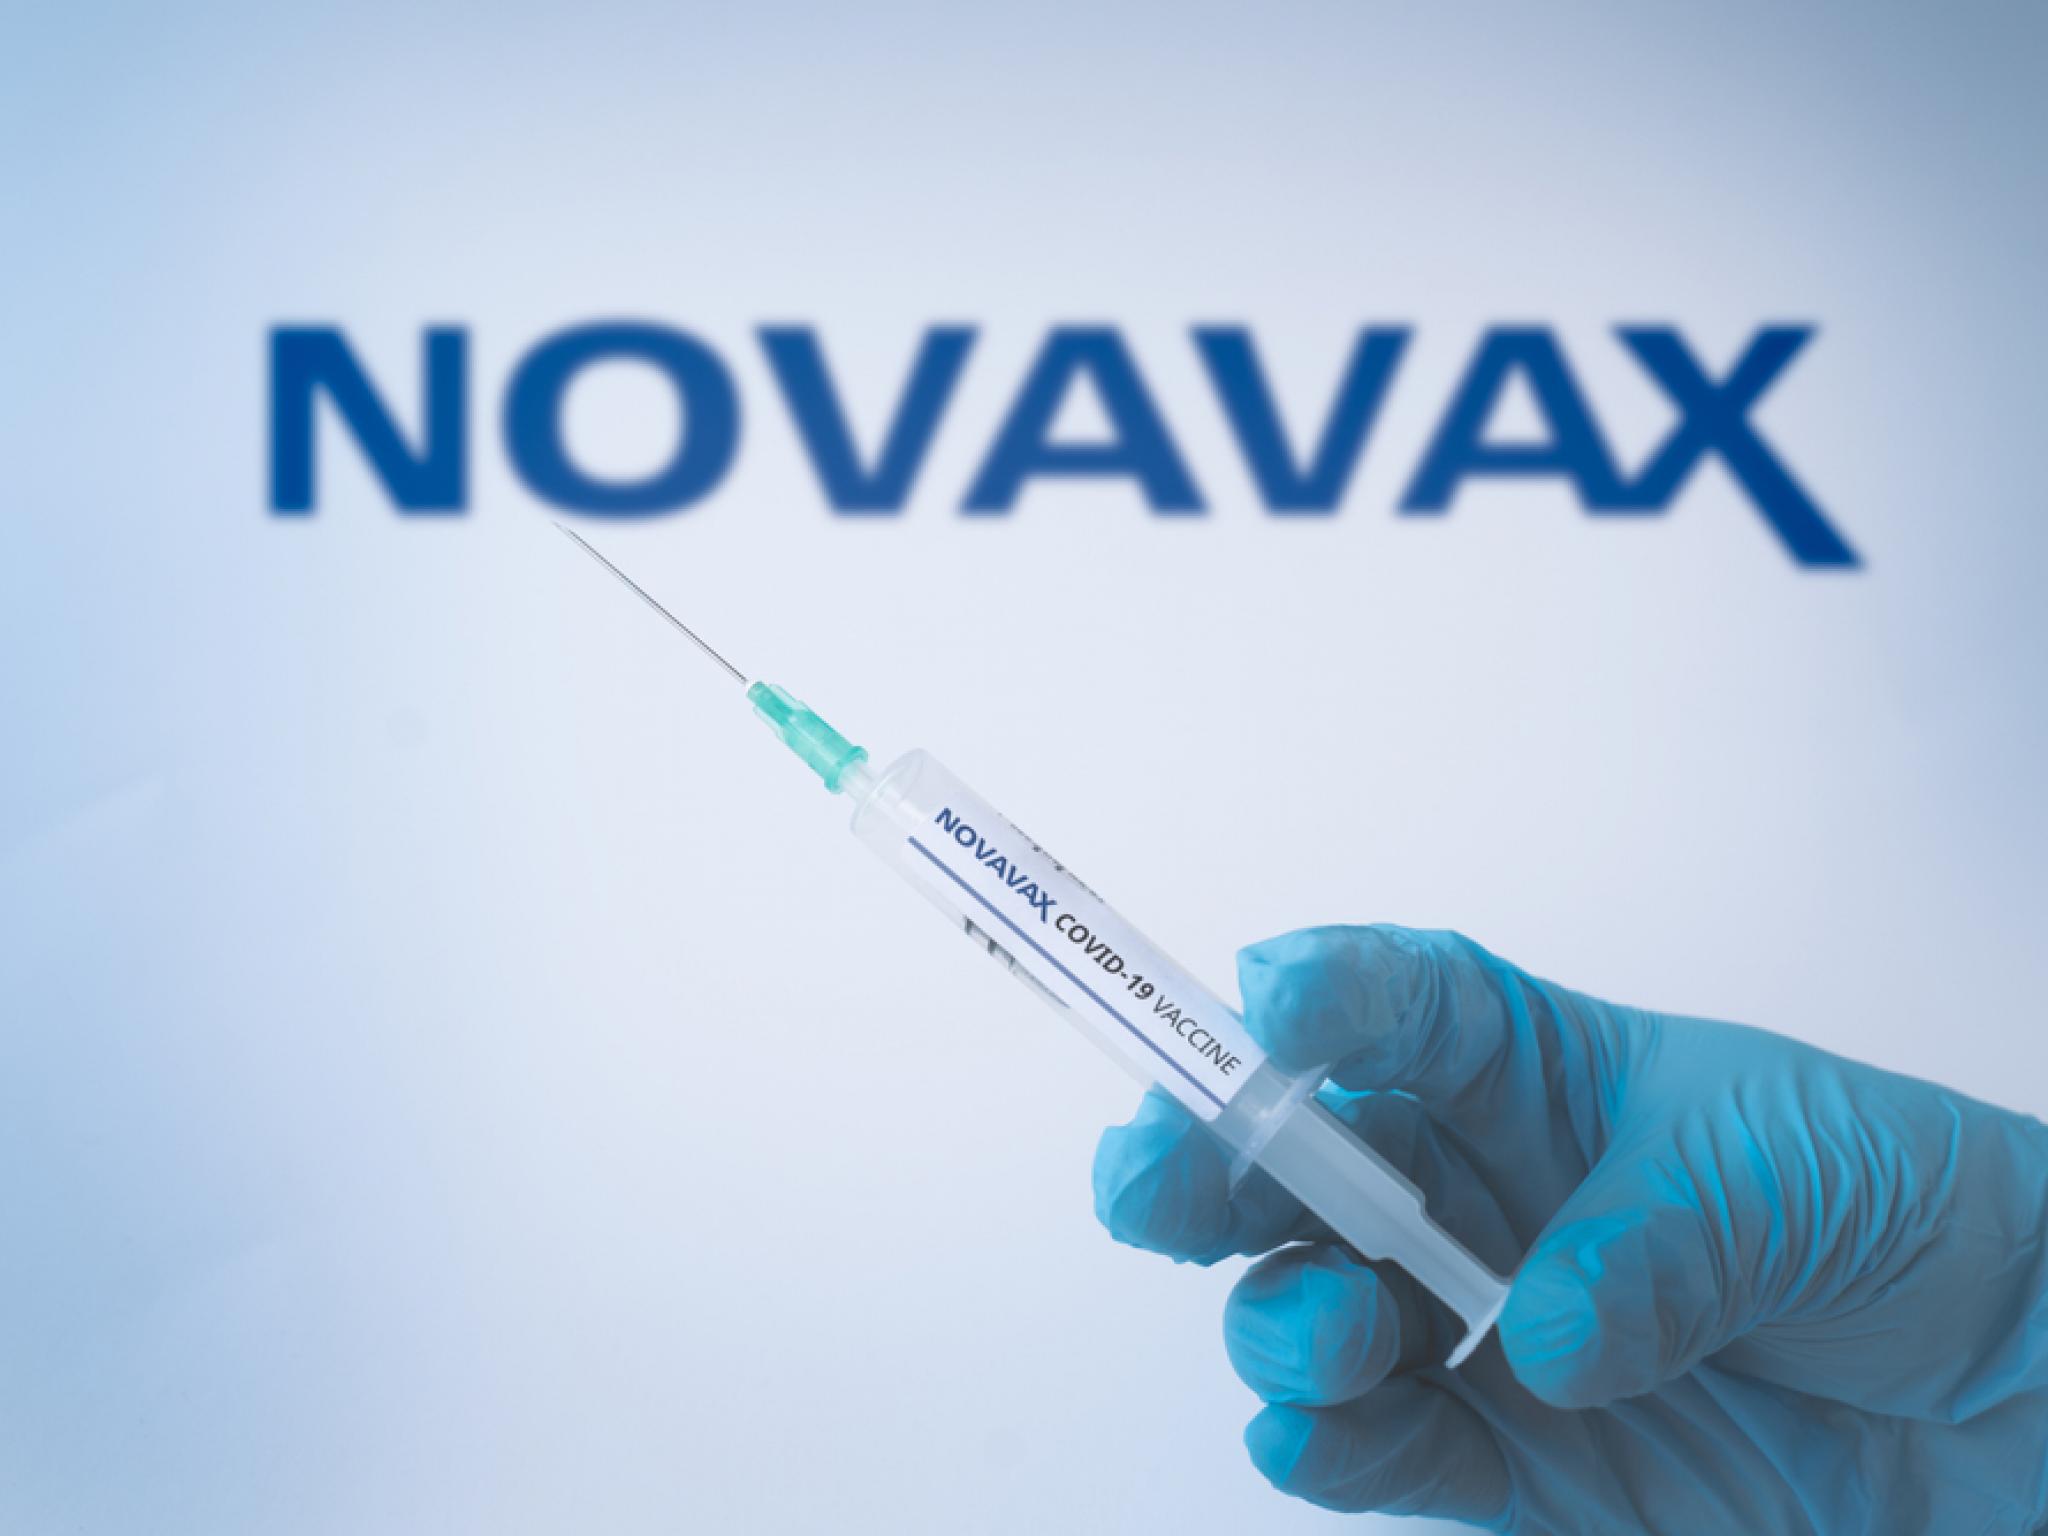  whats-going-on-with-novavax-stock-thursday 